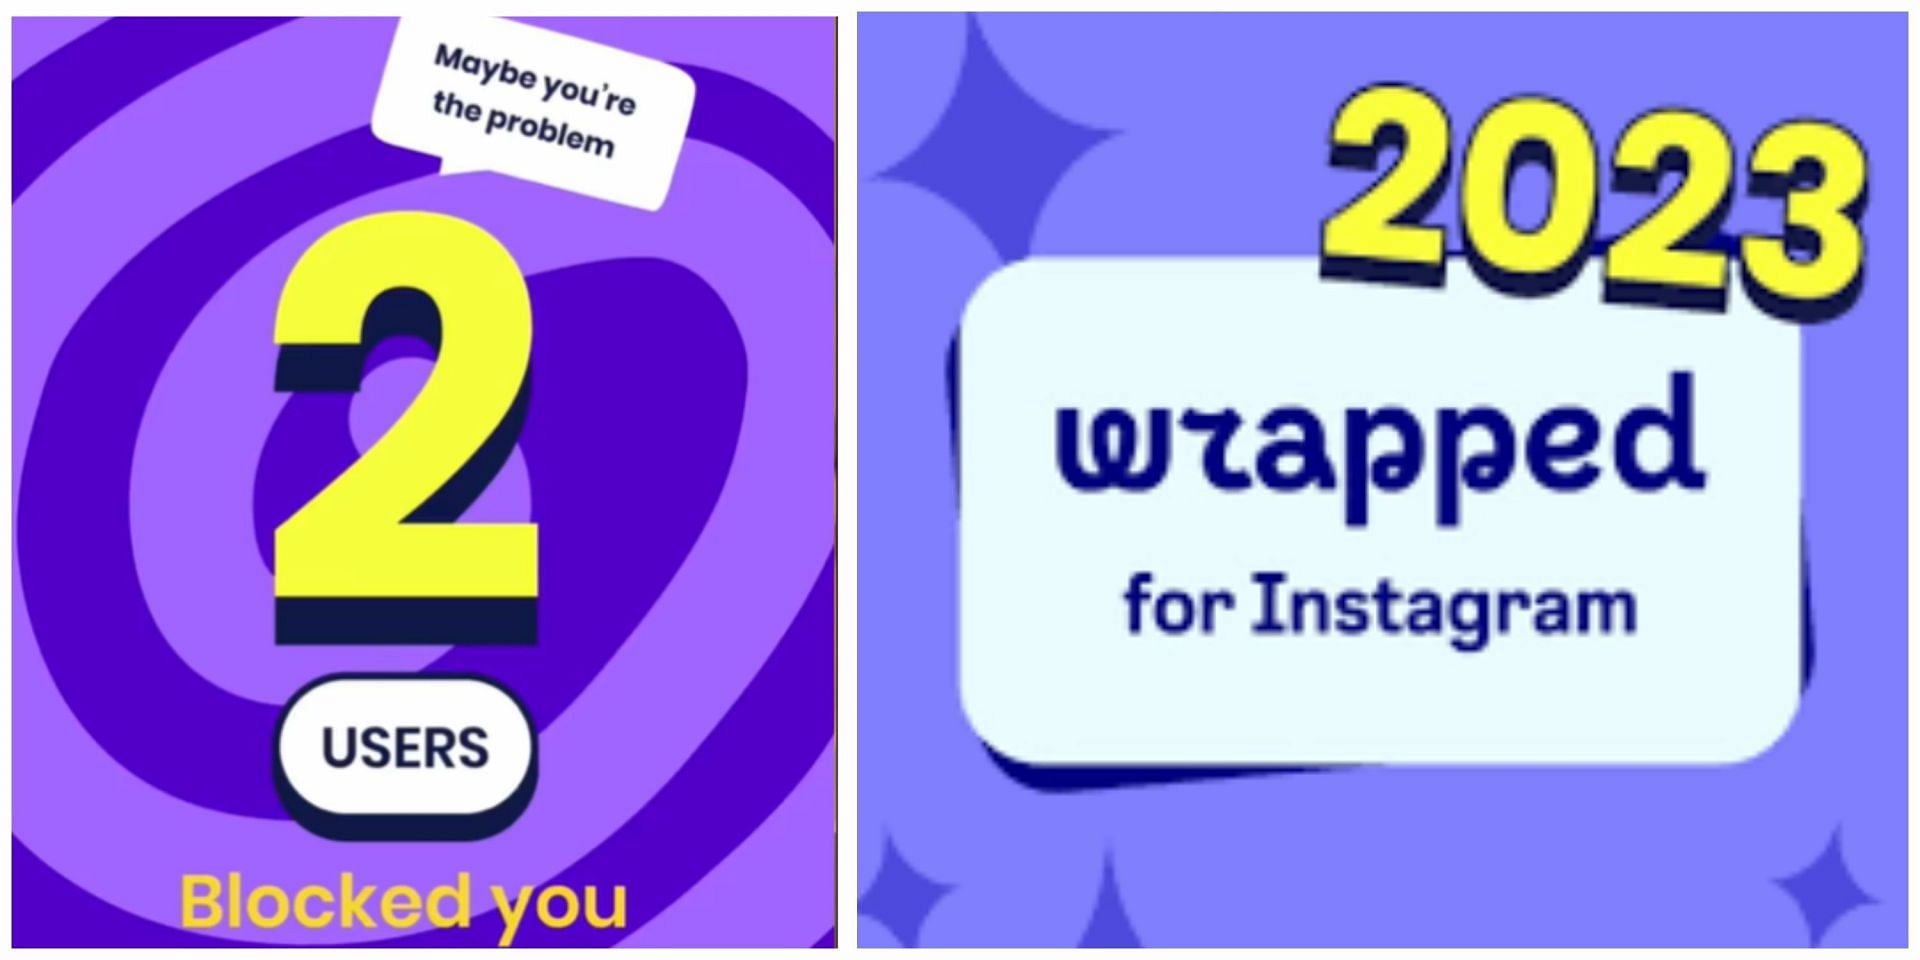 Instagram Wrapped 2023 How to get, what to expect, suitable devices